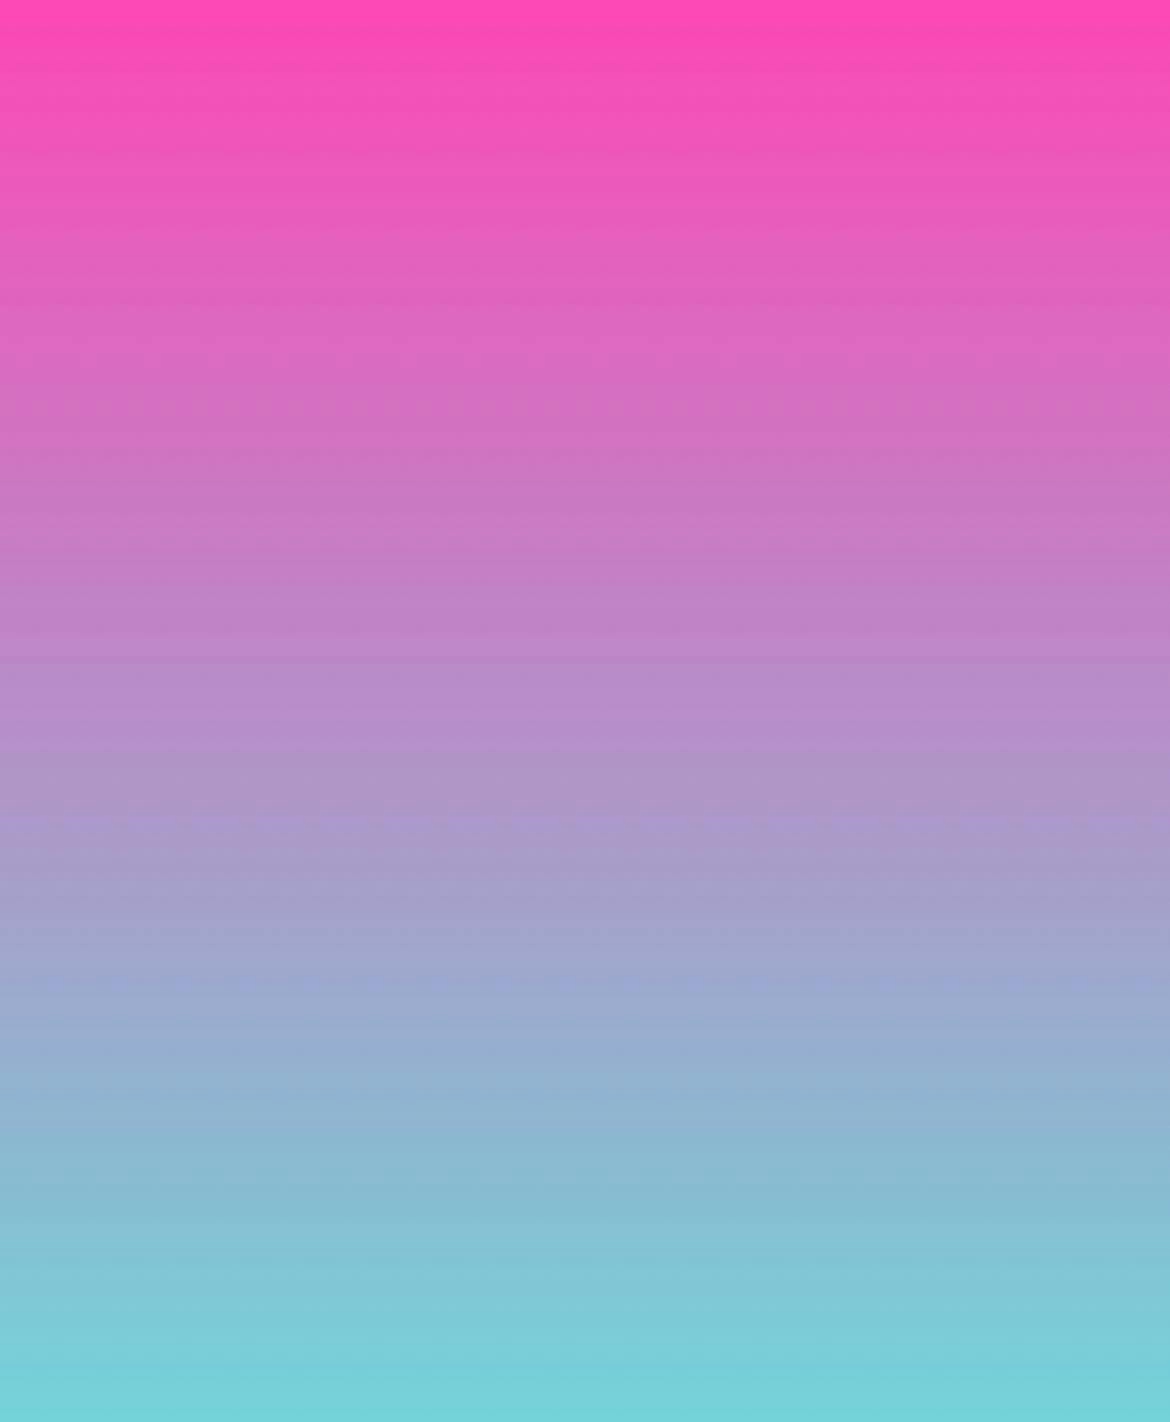 A pink to blue gradient